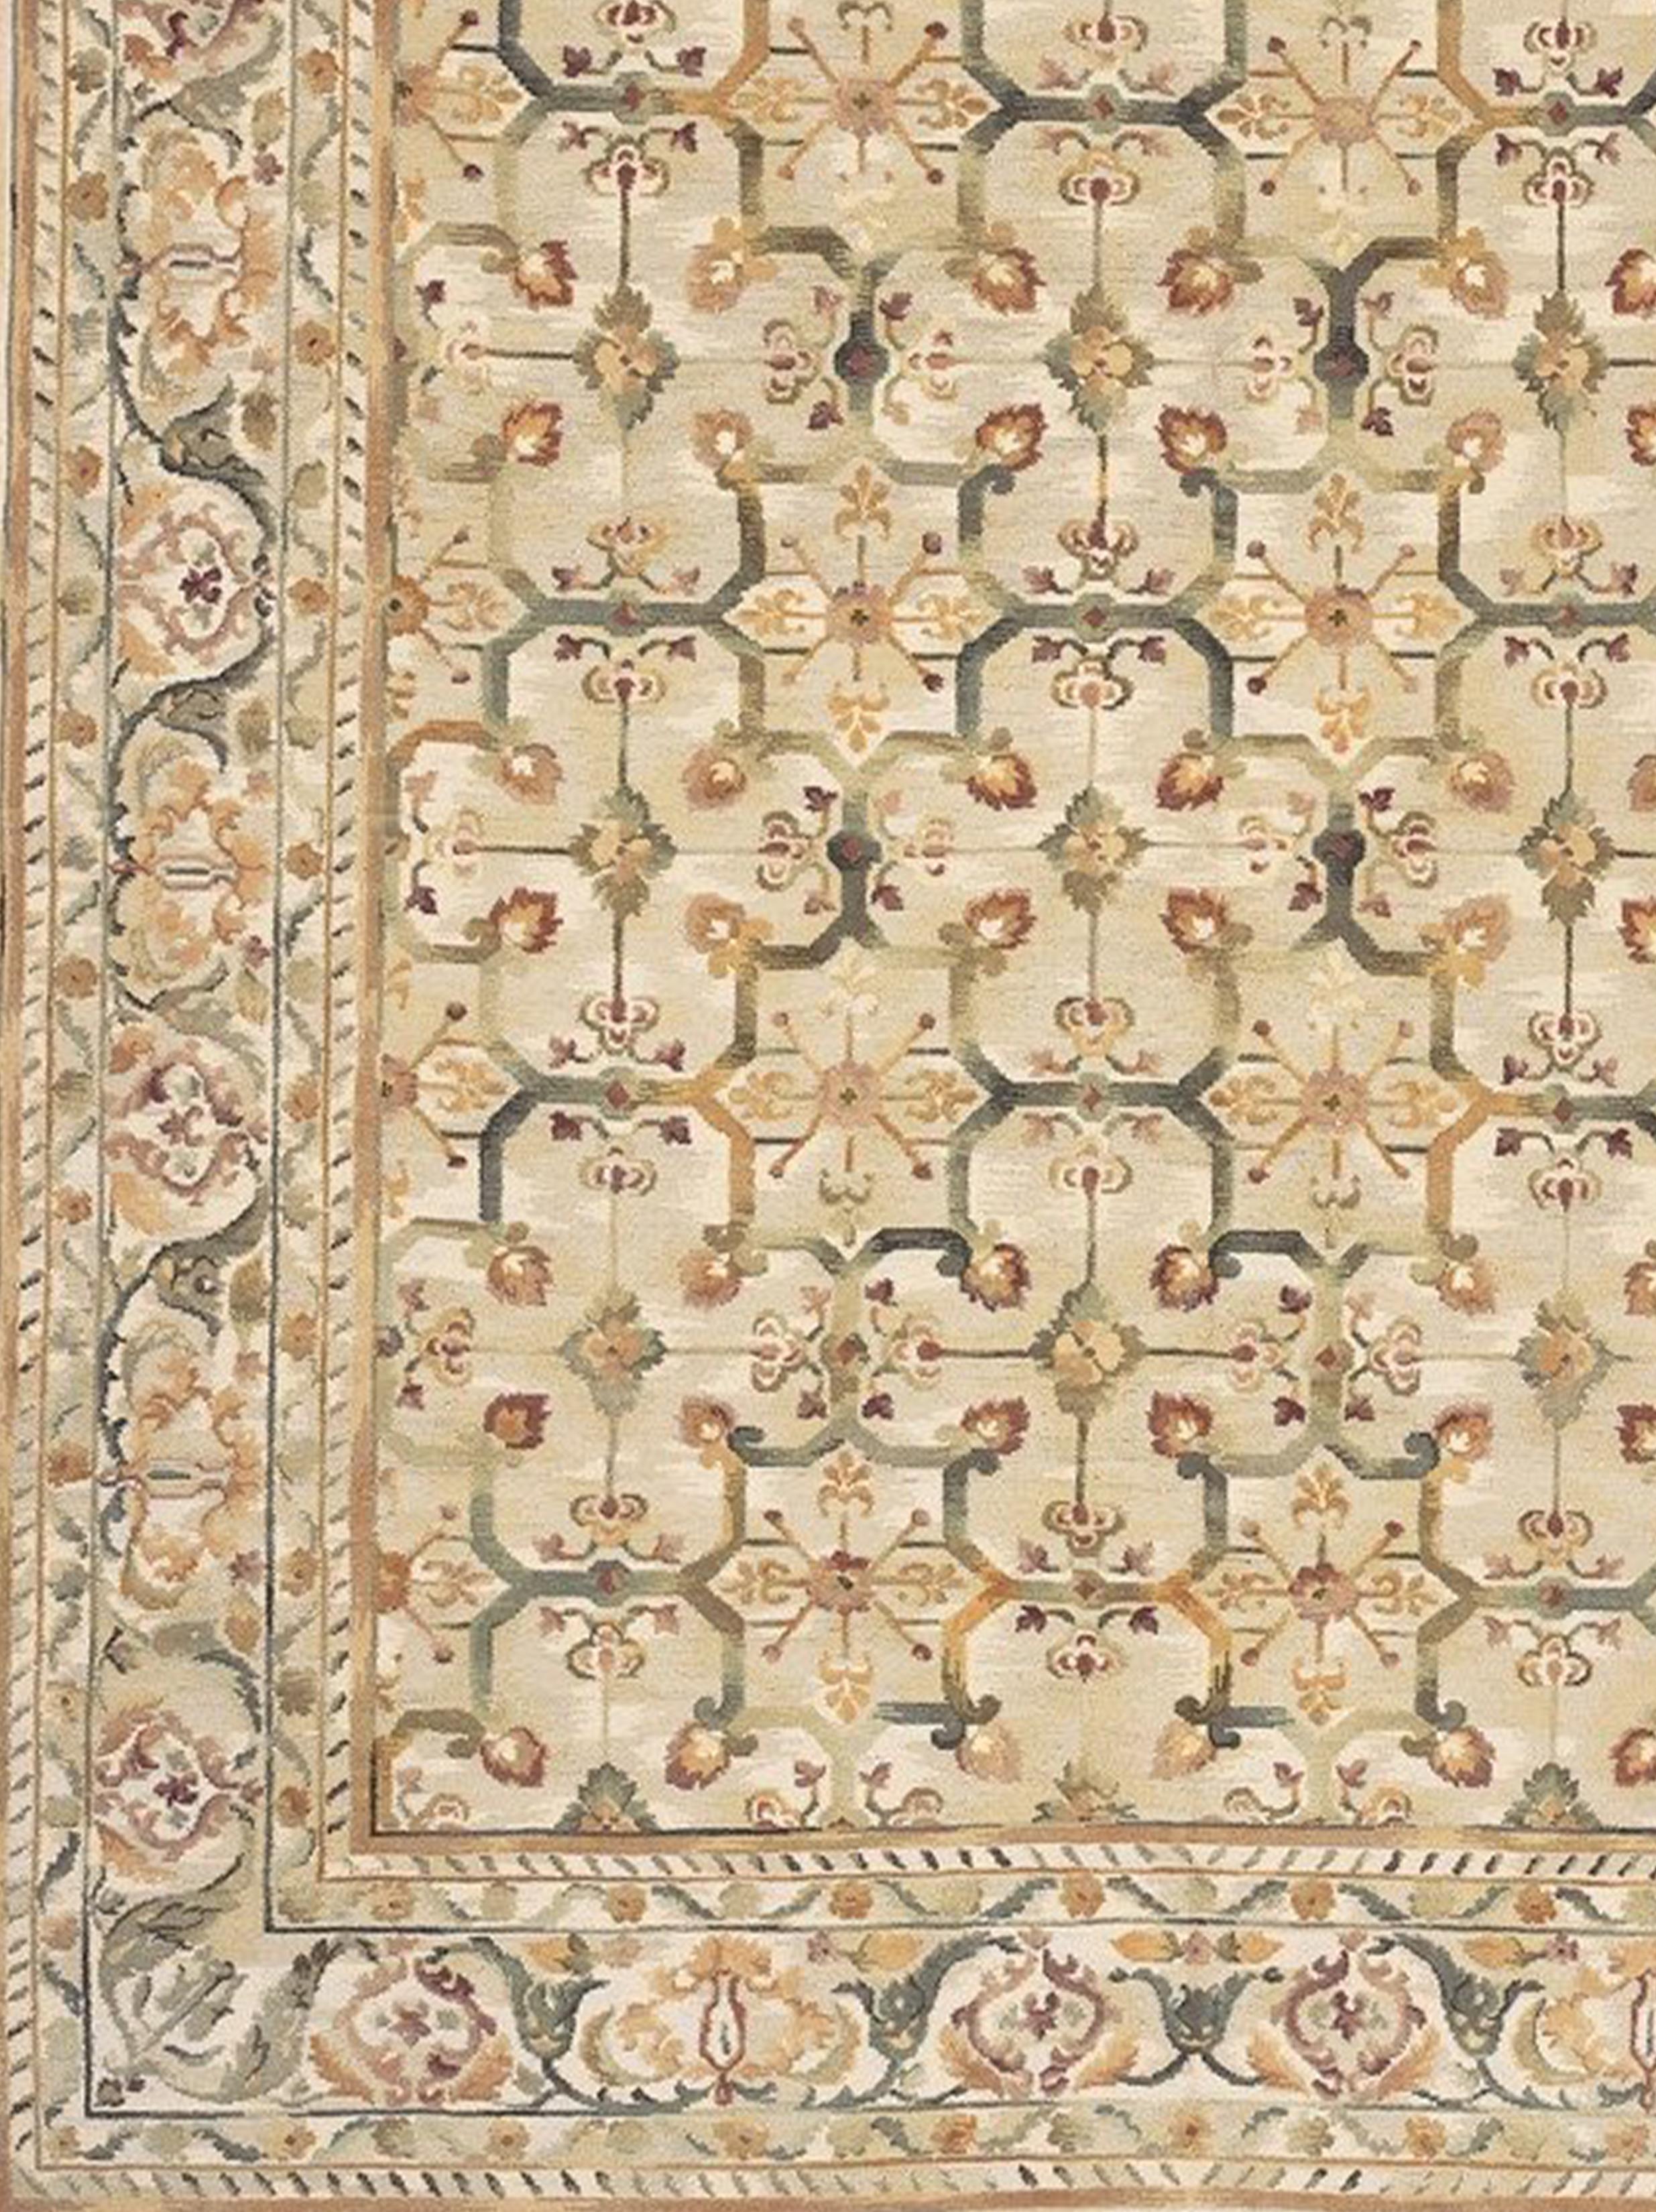 Based on an original Asmara painting by Russian theater artist Ludmila Slavinsky, Kashgar was inspired by carpets of the ancient silk road, where artisans from Persia, China, Turkey and Russia commingled to create a distinctive new style influenced